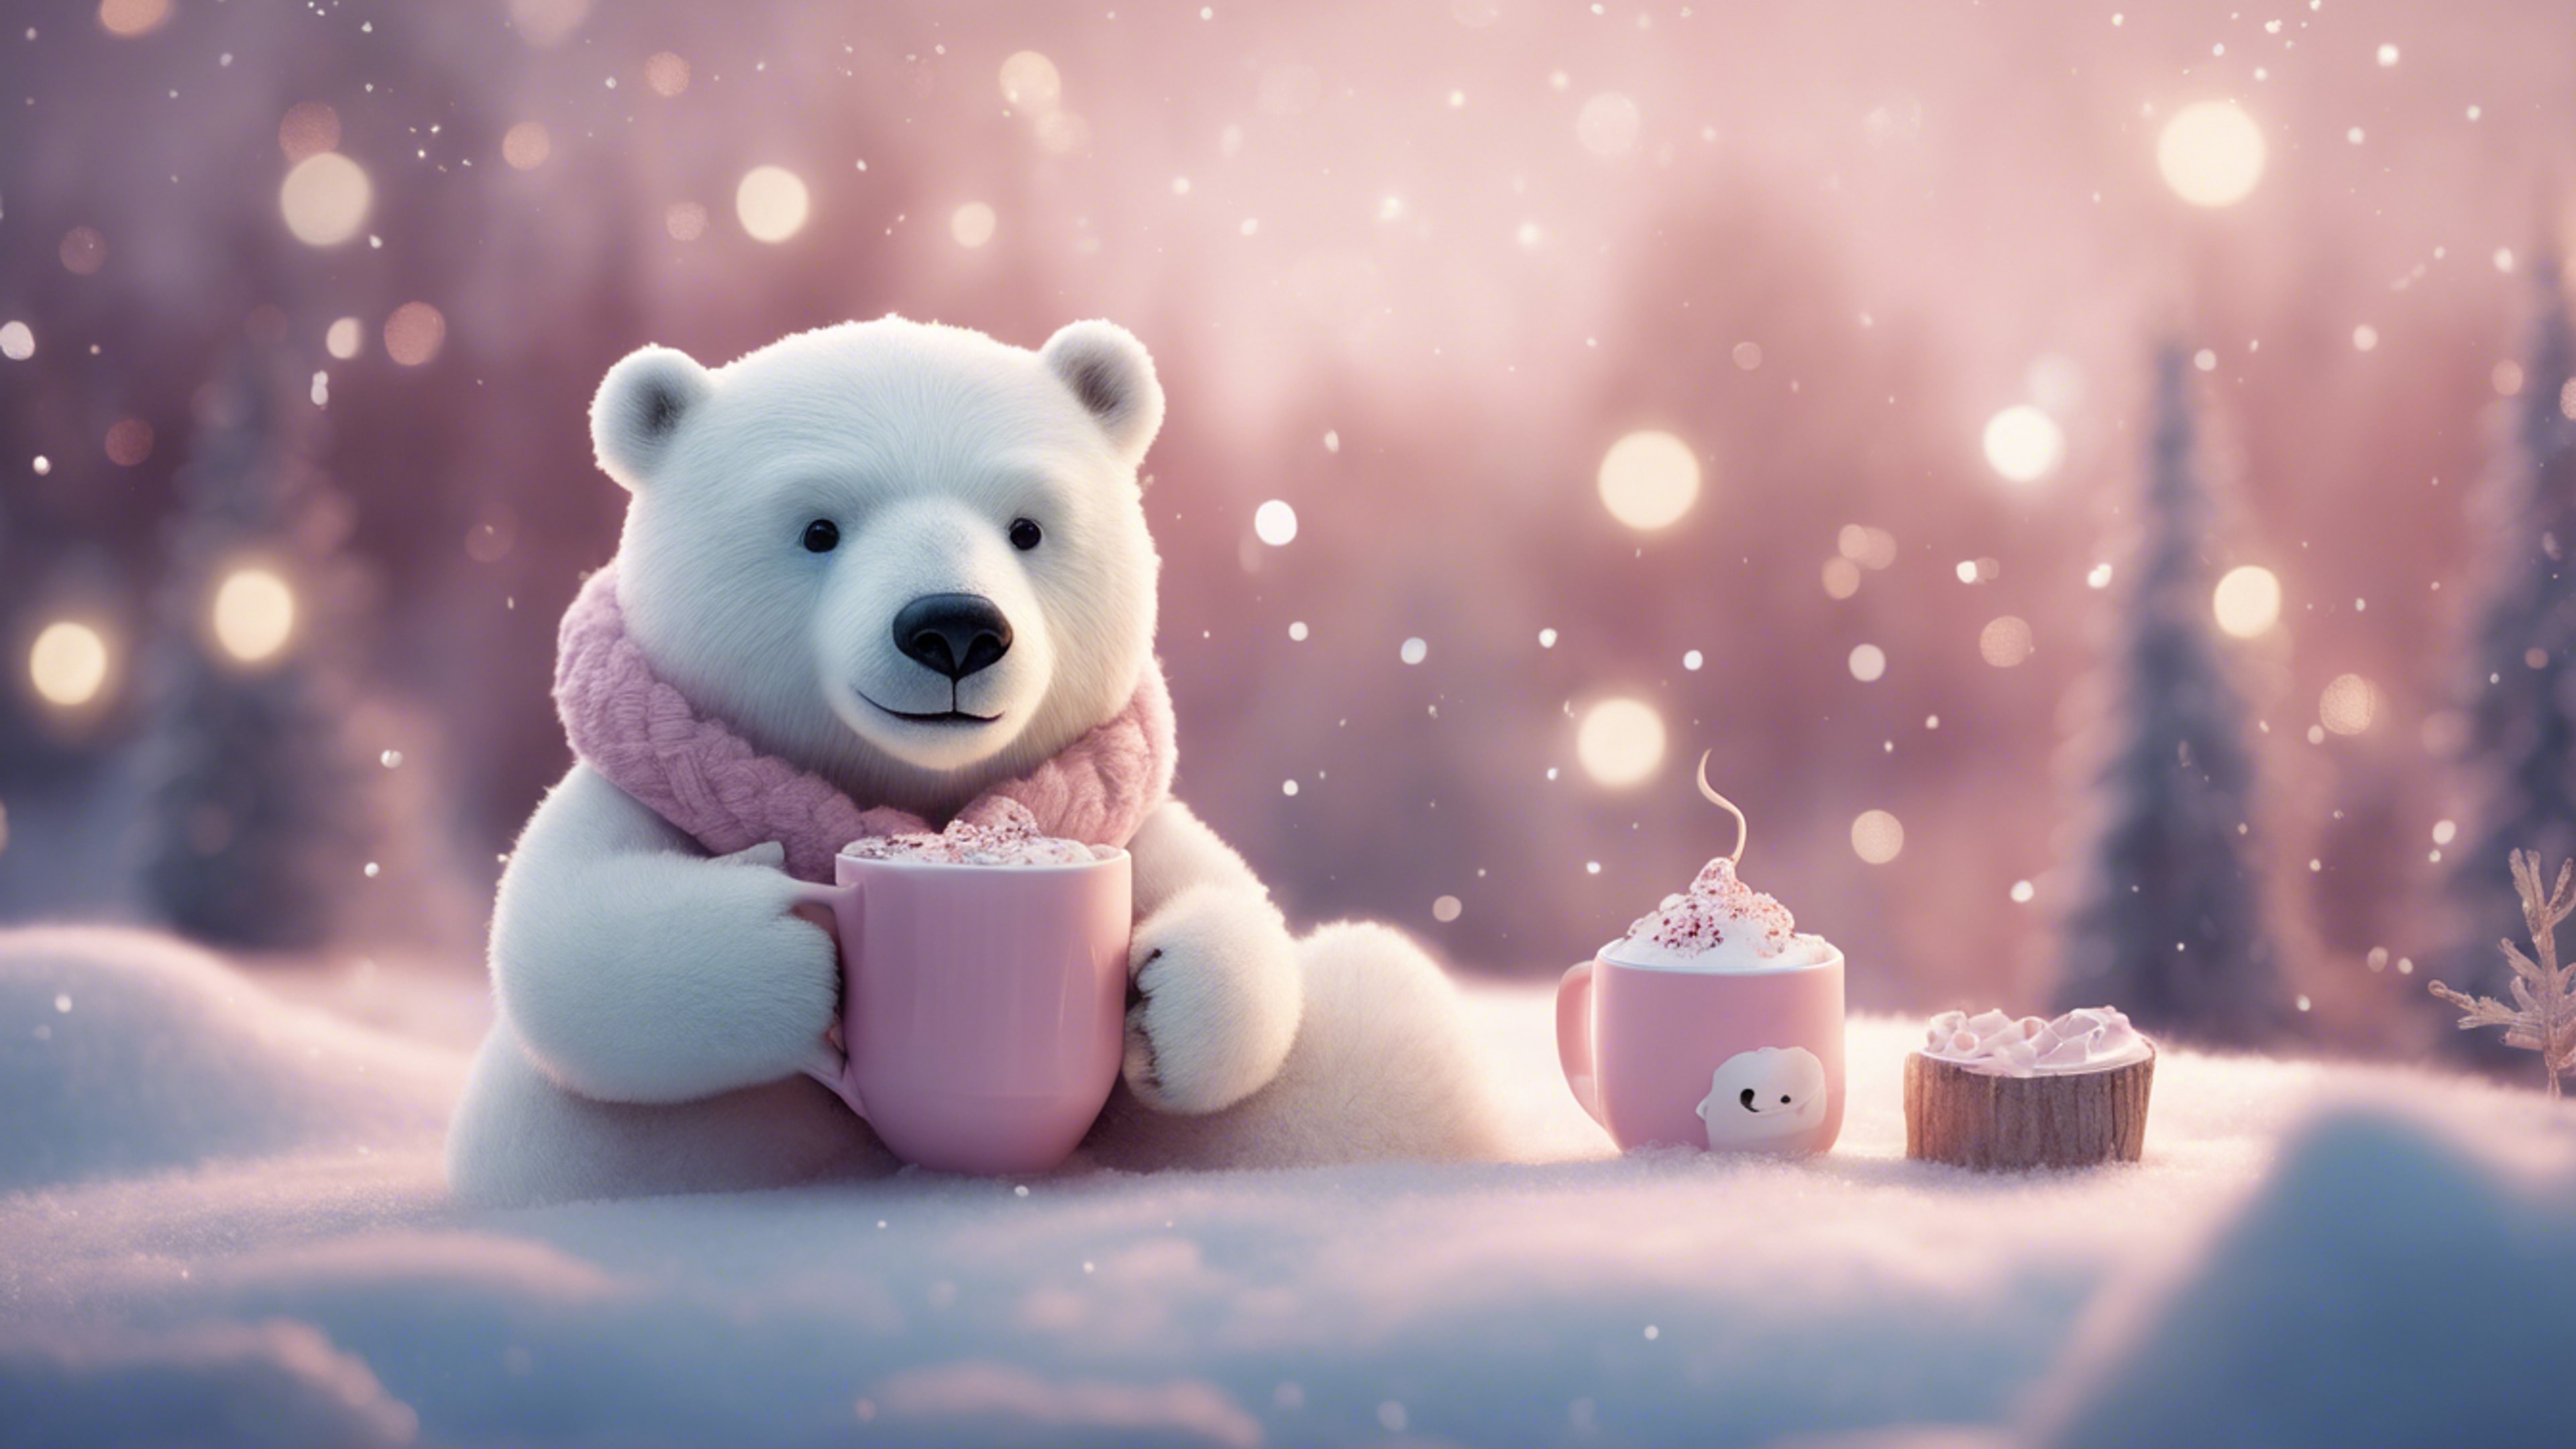 A whimsical pastel winter landscape with a lovely moonlight night featuring a kawaii-inspired polar bear sipping hot chocolate. Валлпапер[2f0fc56546c54560a936]